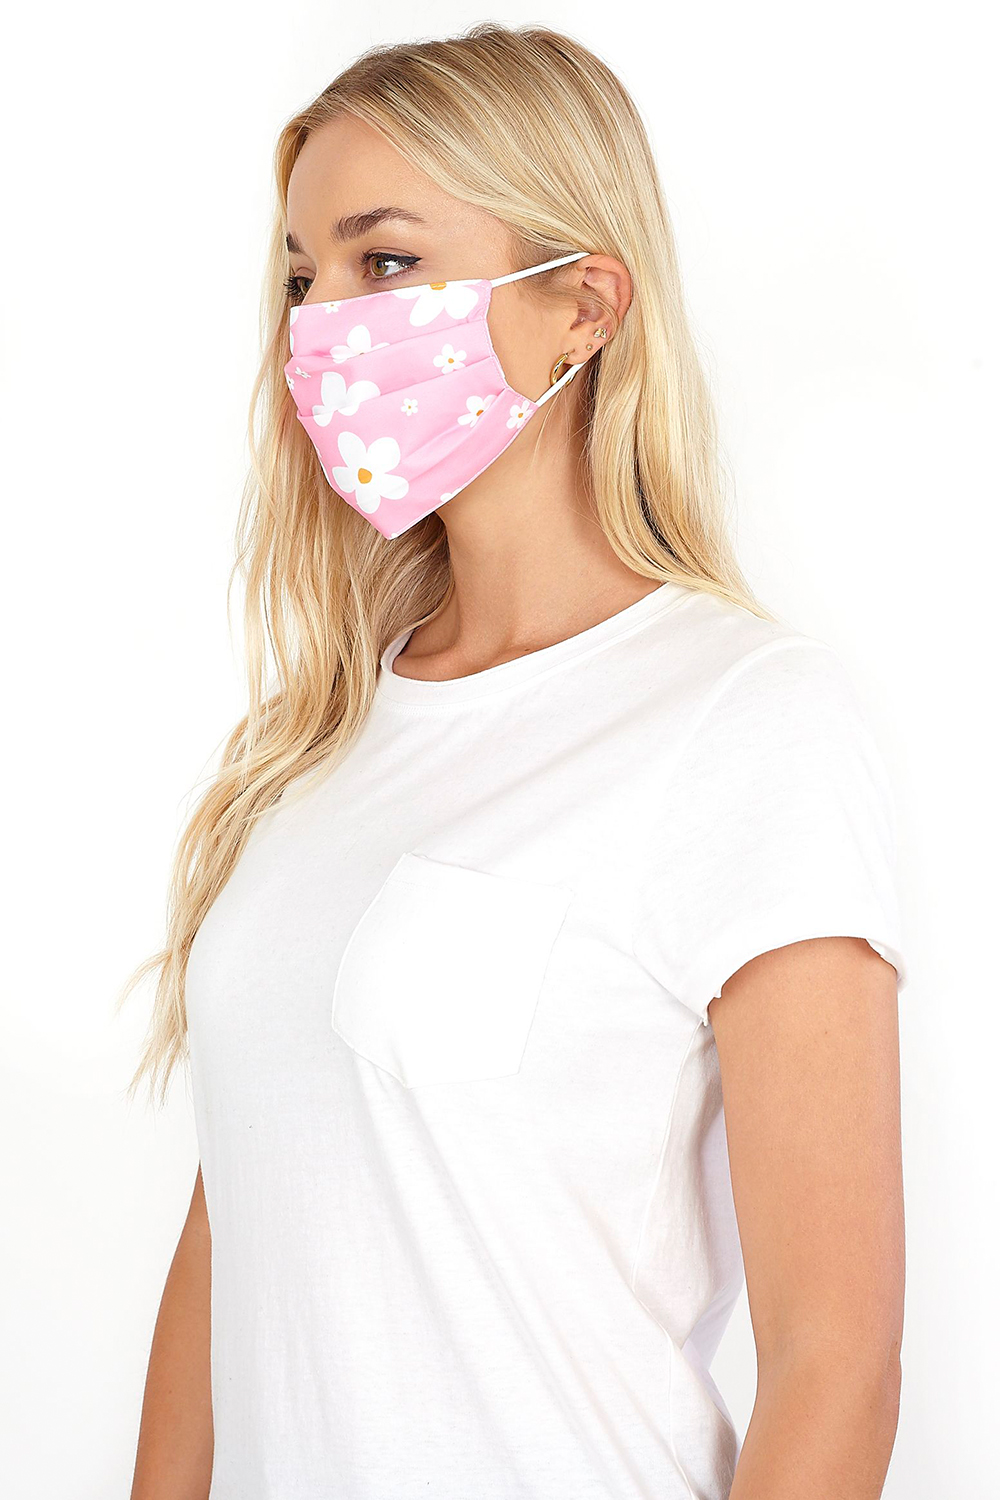 Flower Print Fast Drying Fashion Face Mask